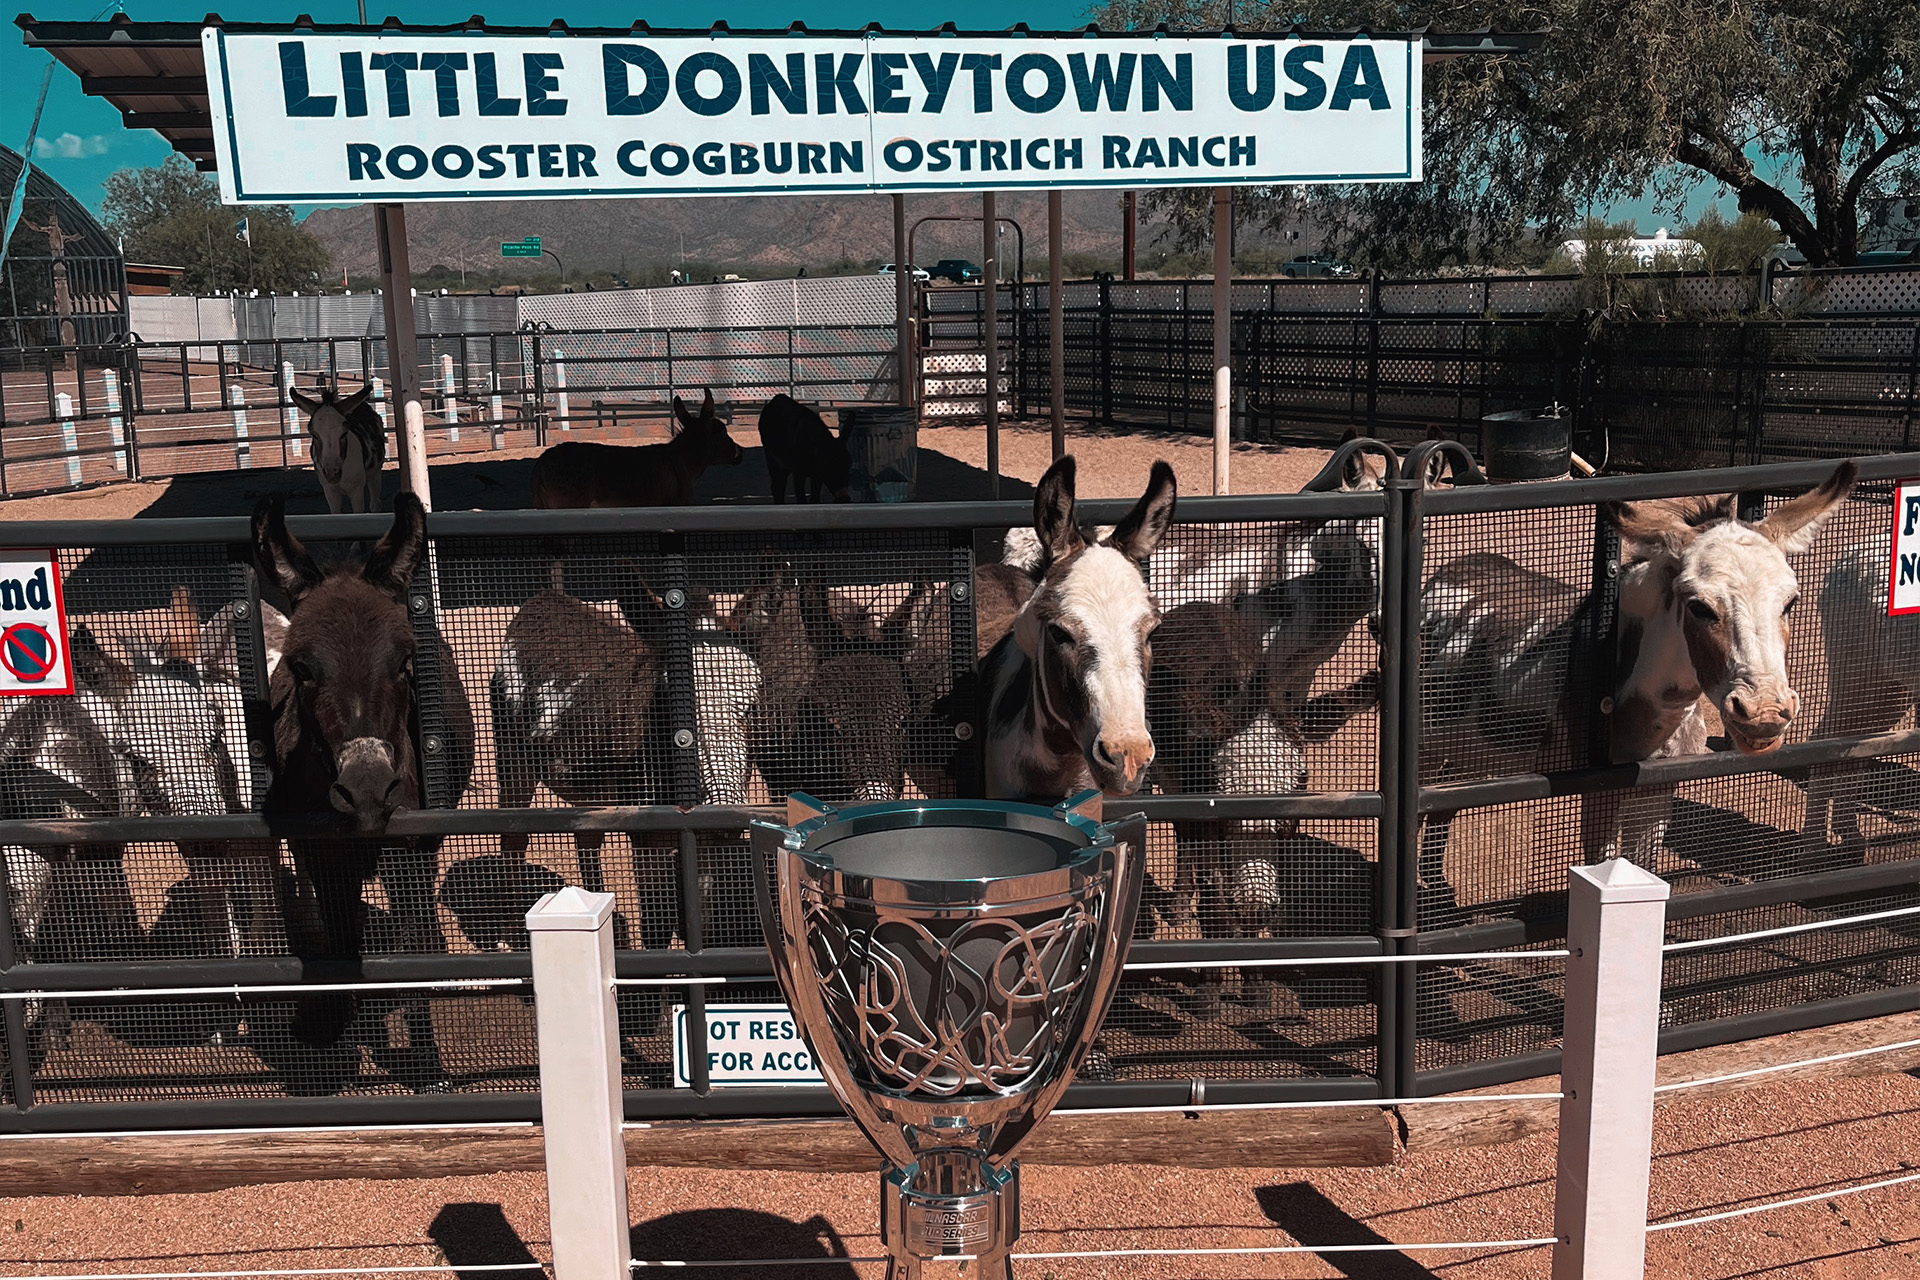 The Bill France Cup in front of donkeys at the Little Donkeytown USA Rooster Coburn Ostrich Ranch